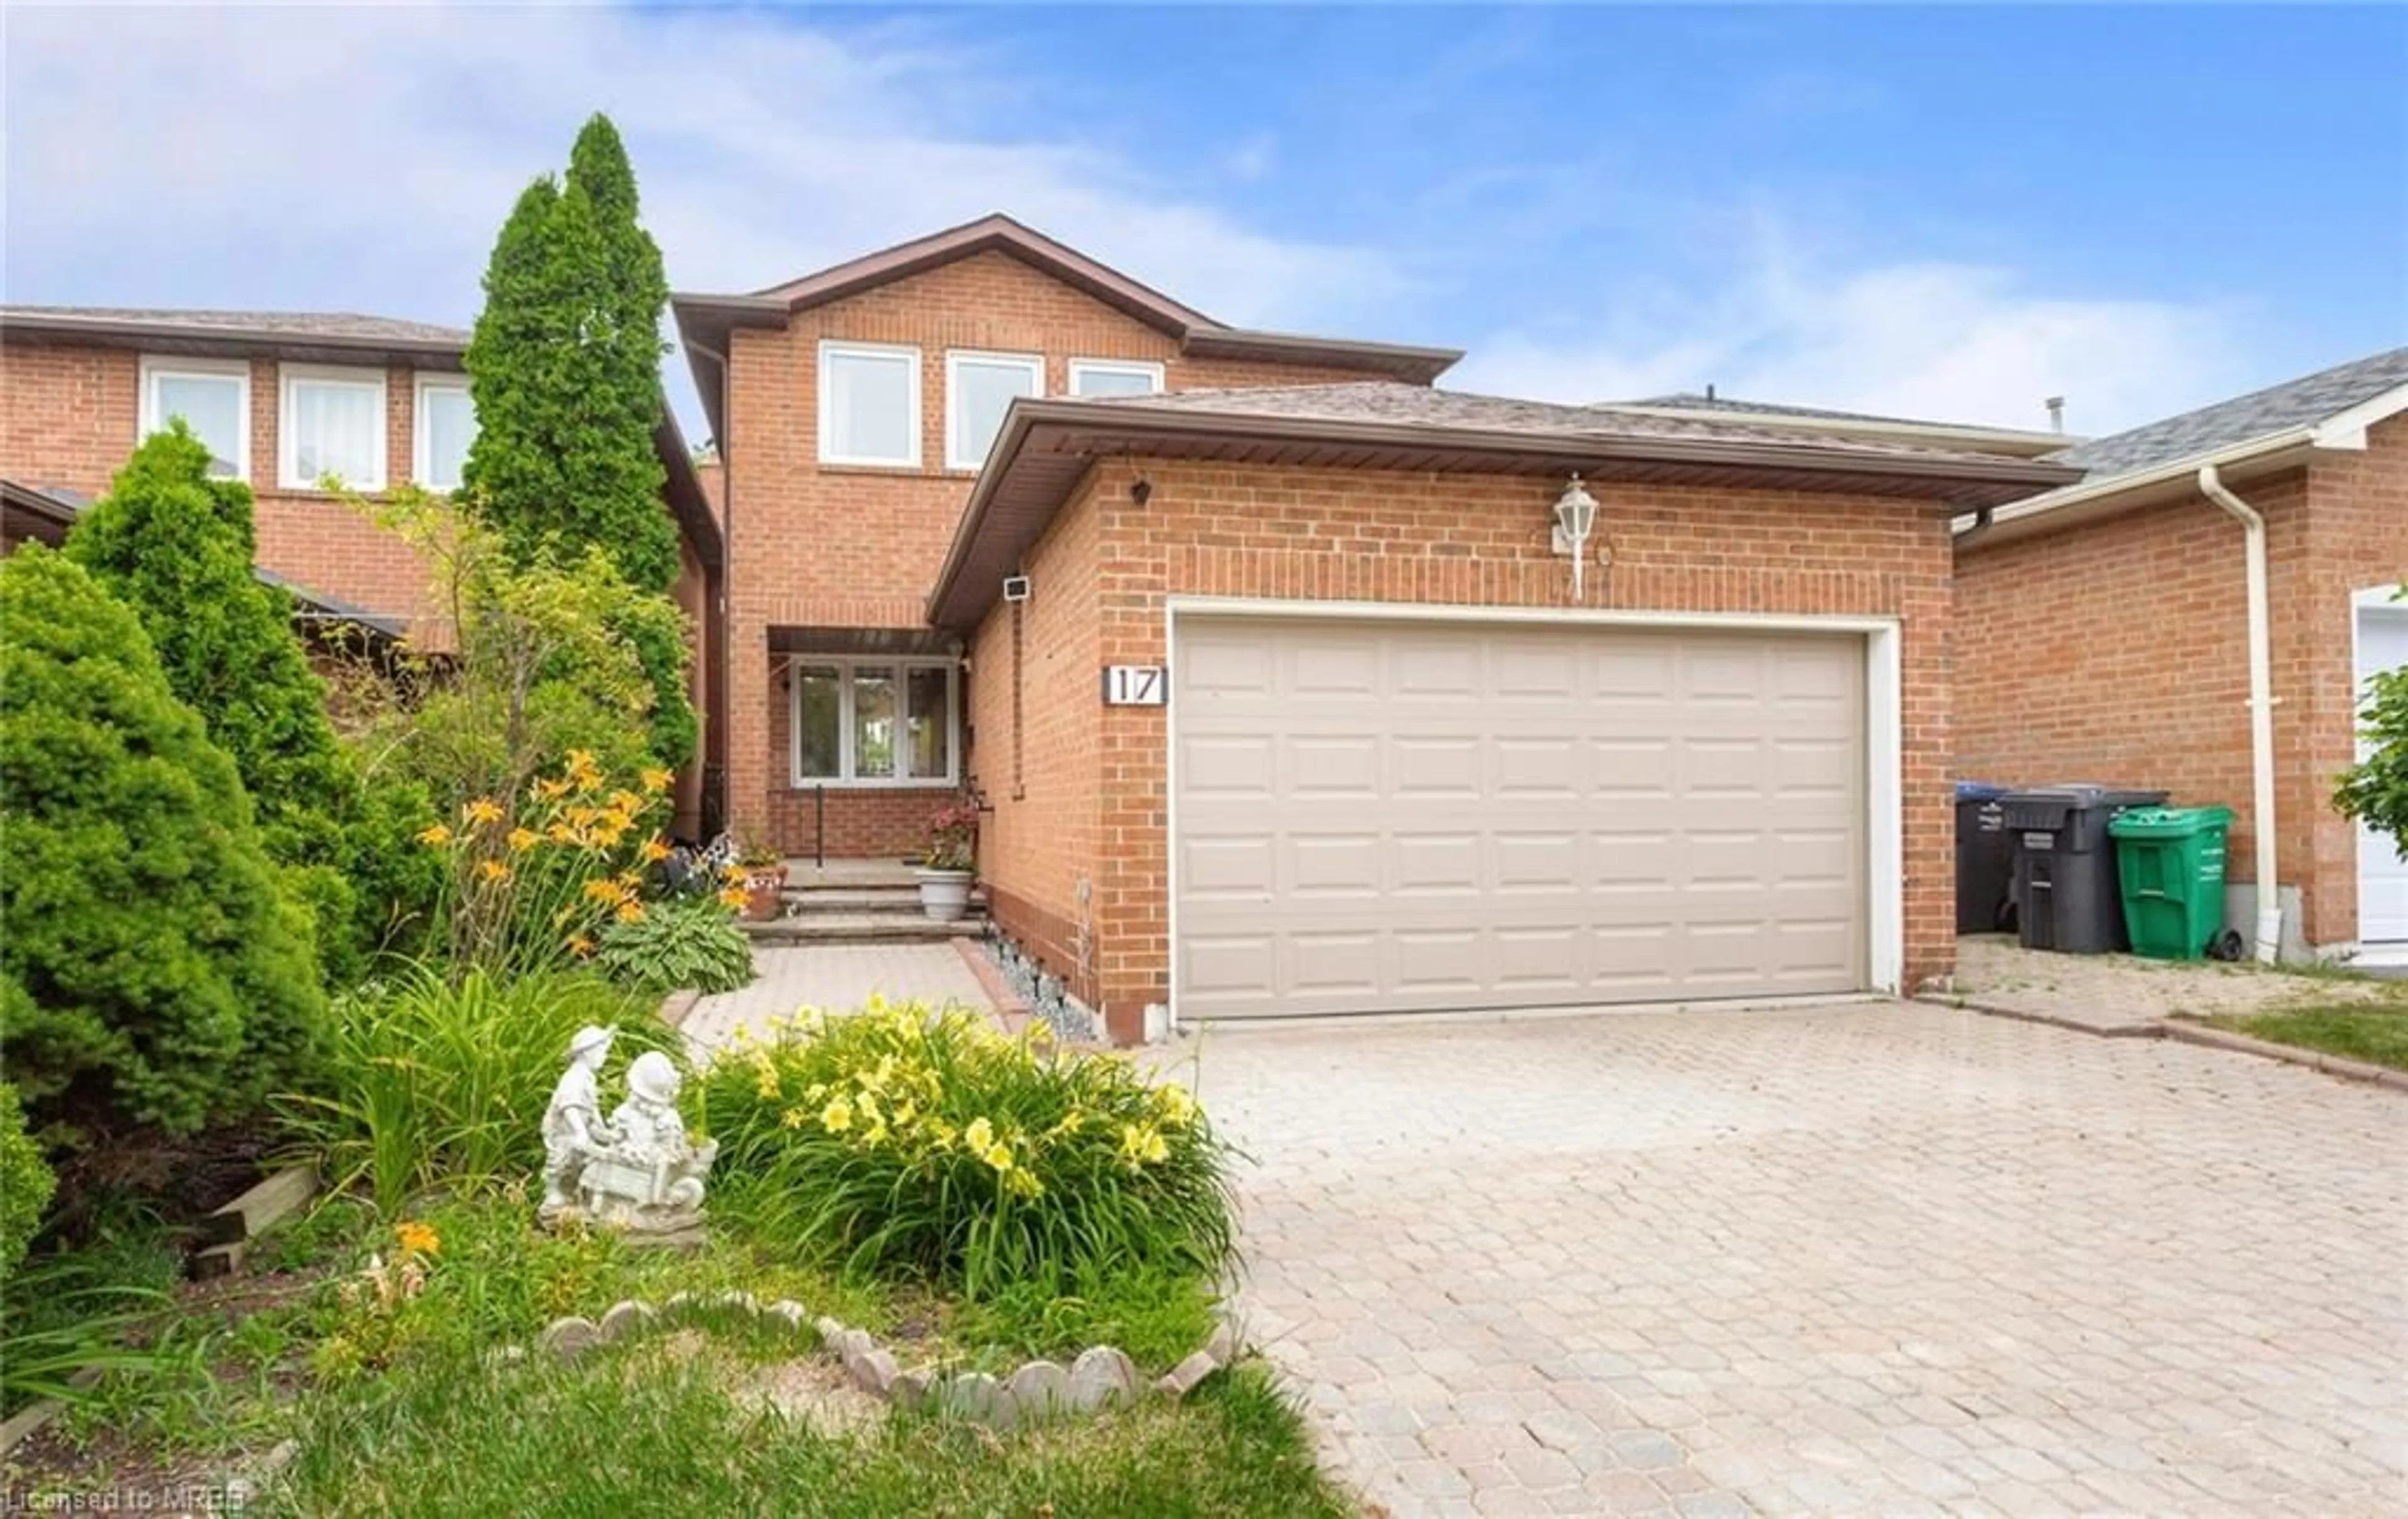 Home with brick exterior material for 17 Hanson Rd, Mississauga Ontario L5B 2E3